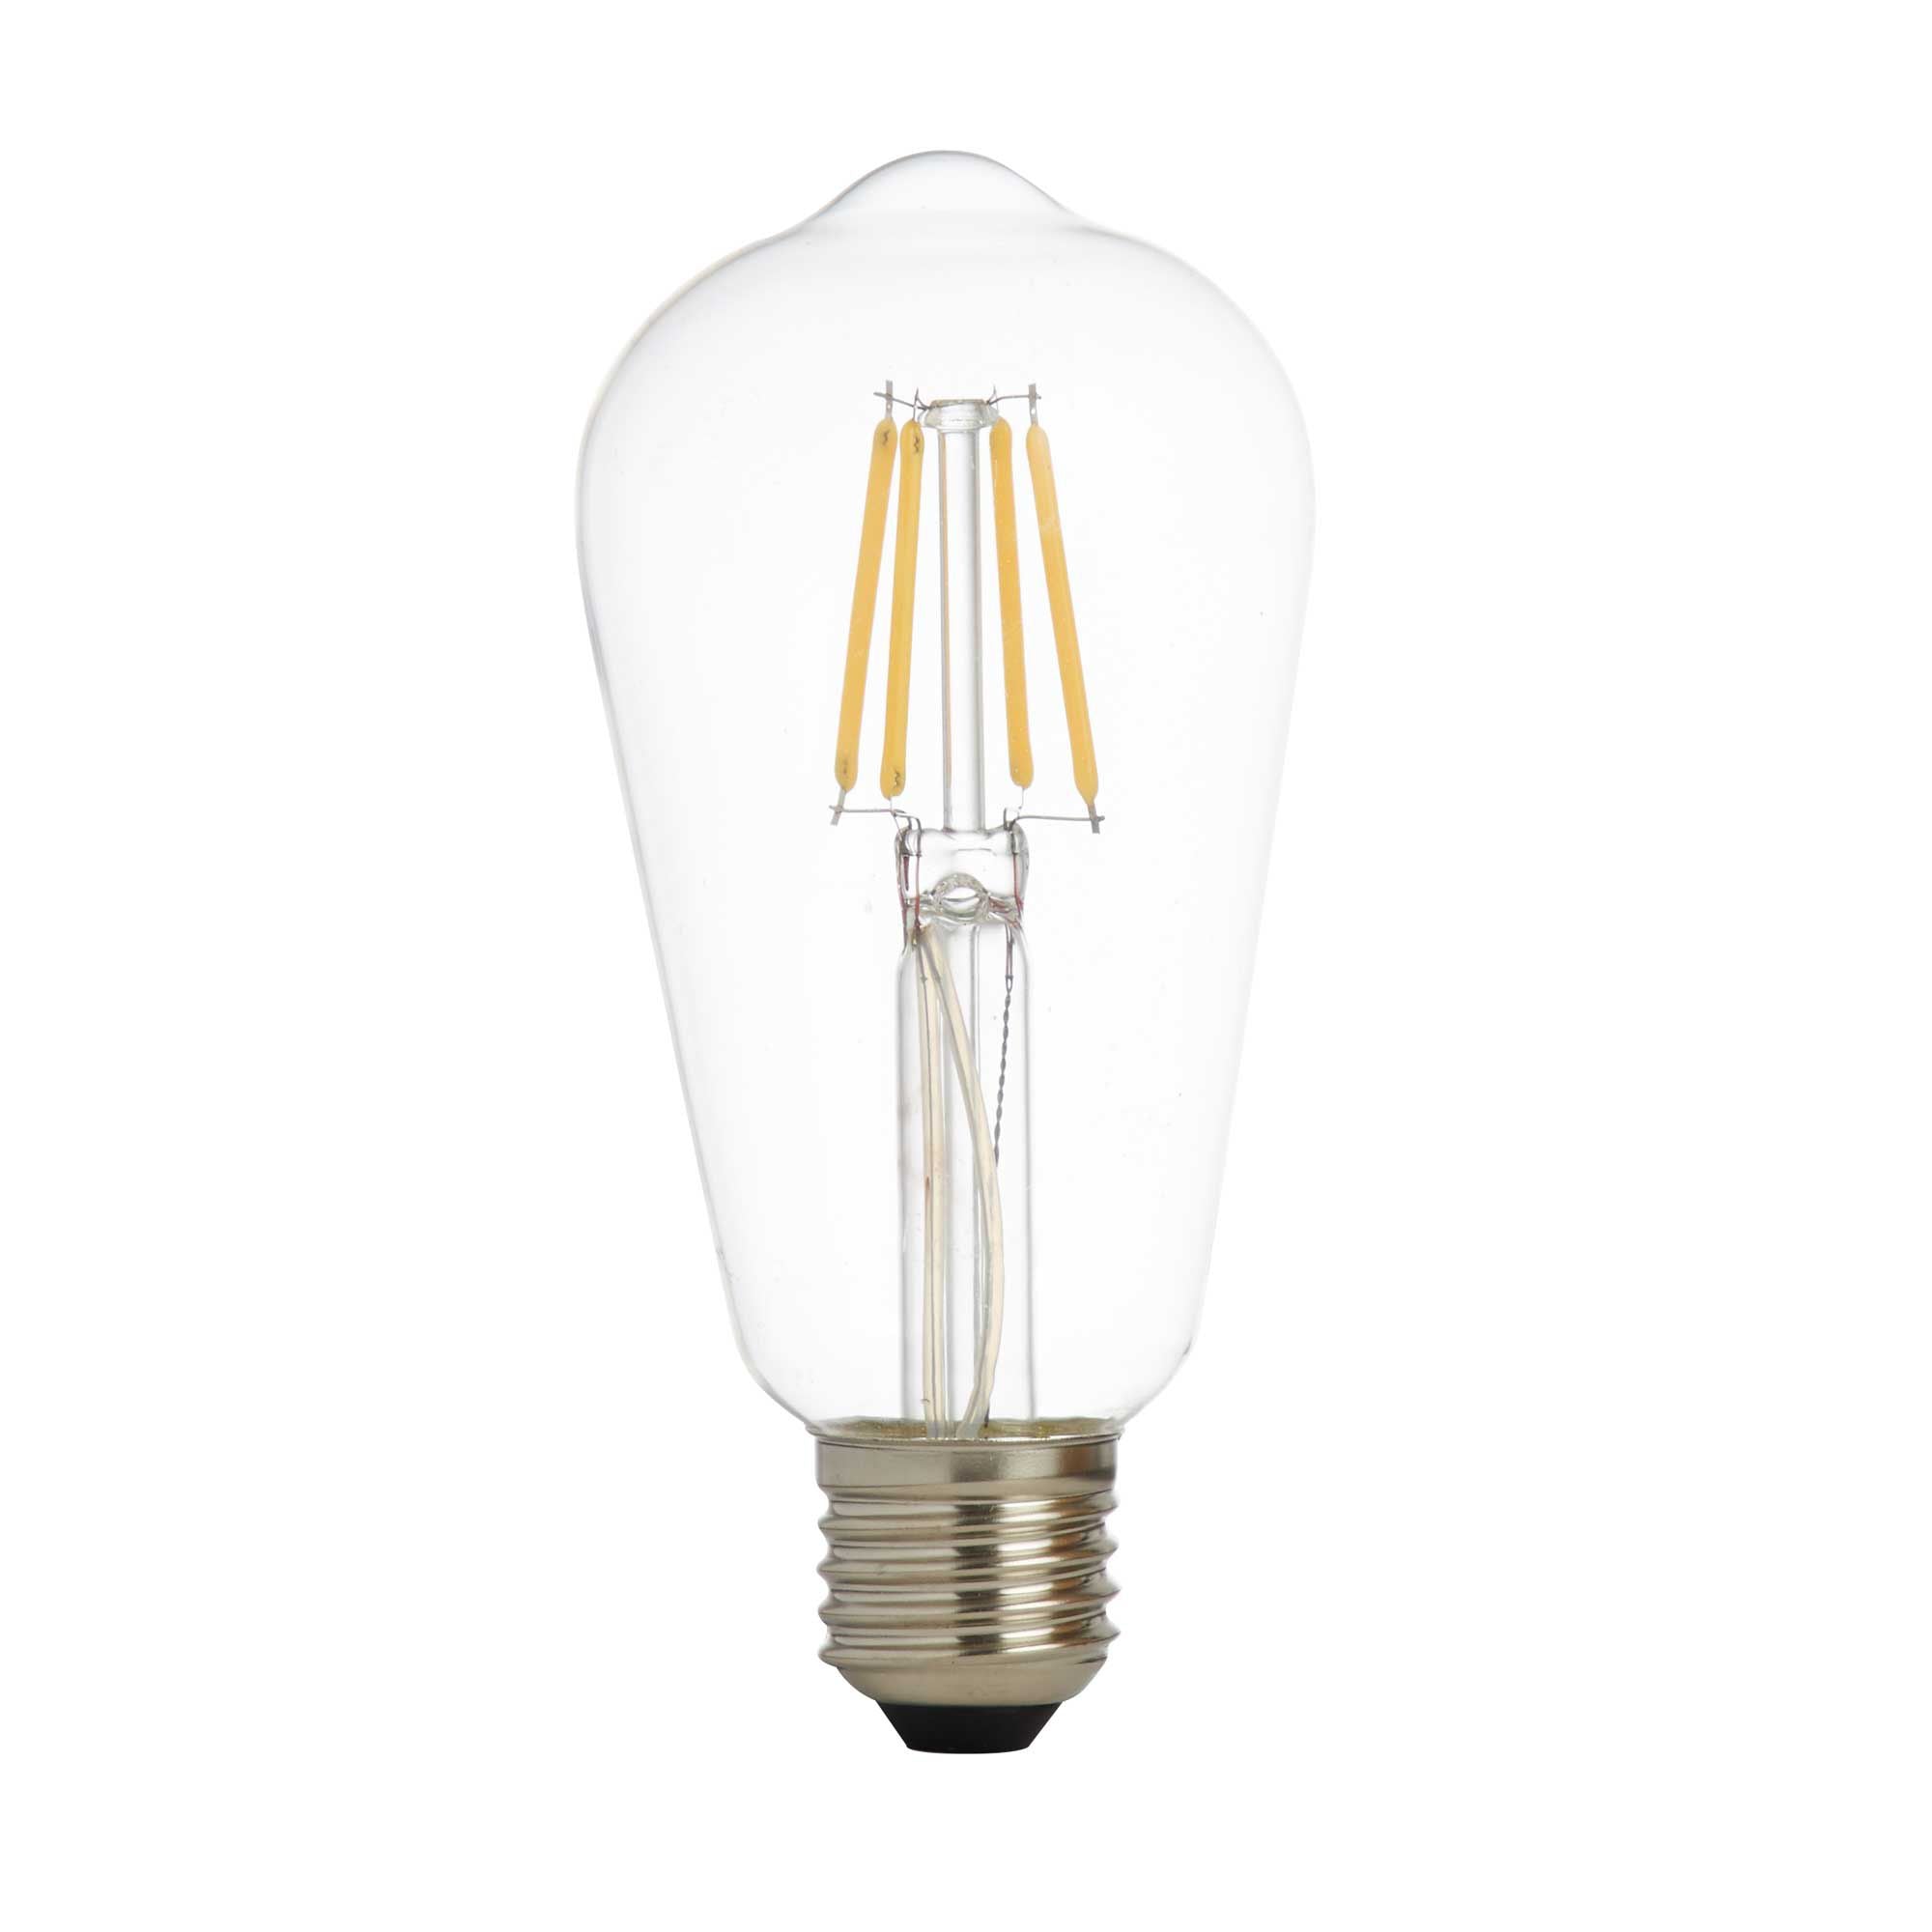 5 Dimmable Led Filament Squirrel Lamp Clear Glass E27 6W 600Lm 2700K